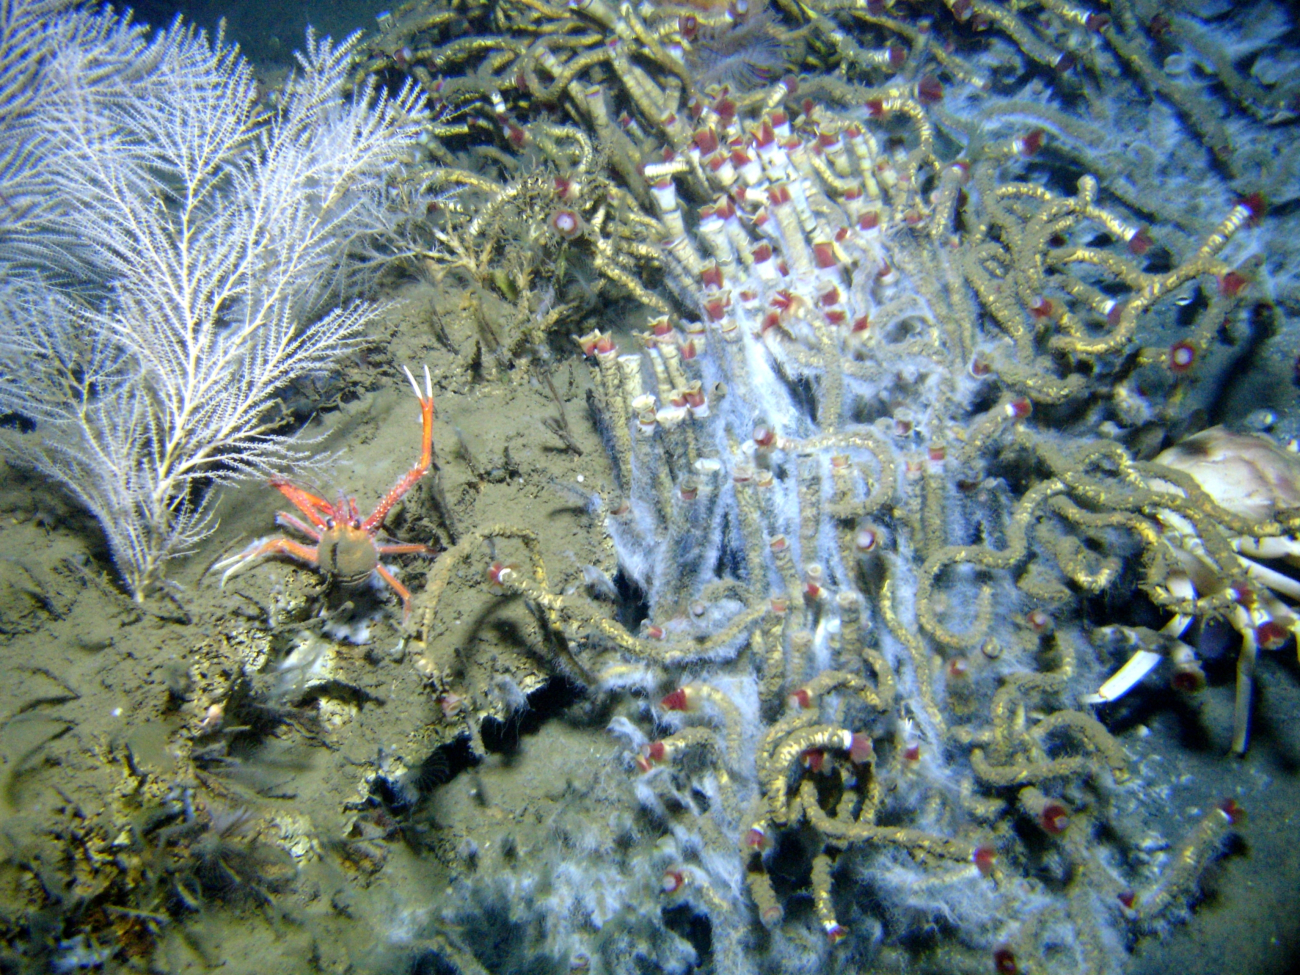 An intertangled mass of lamellibrachian tube worms covered with white bacterialmat material, smaller tube worms with tentacles extended, an orange and whitesquat lobster, a large golden crab (Chaceon fenneri), and a white bamboo coralbush